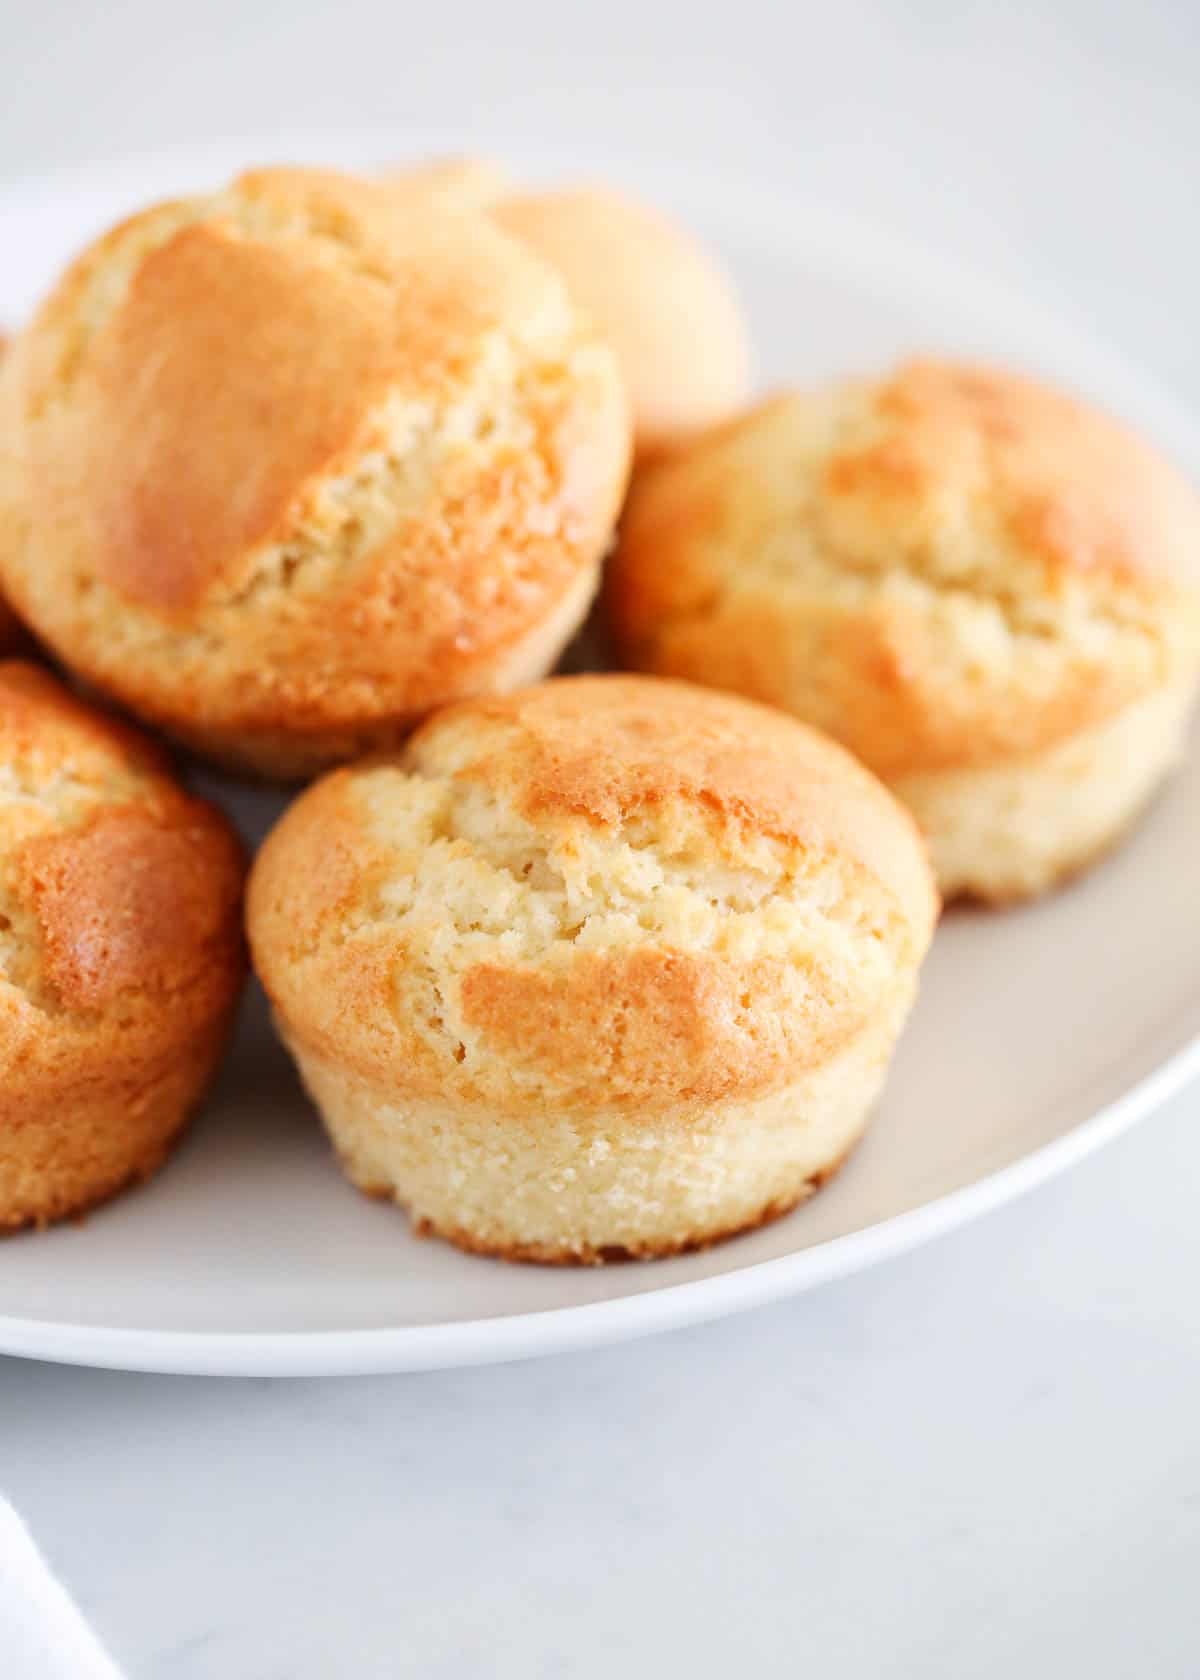 Breakfast muffins on a white plate.